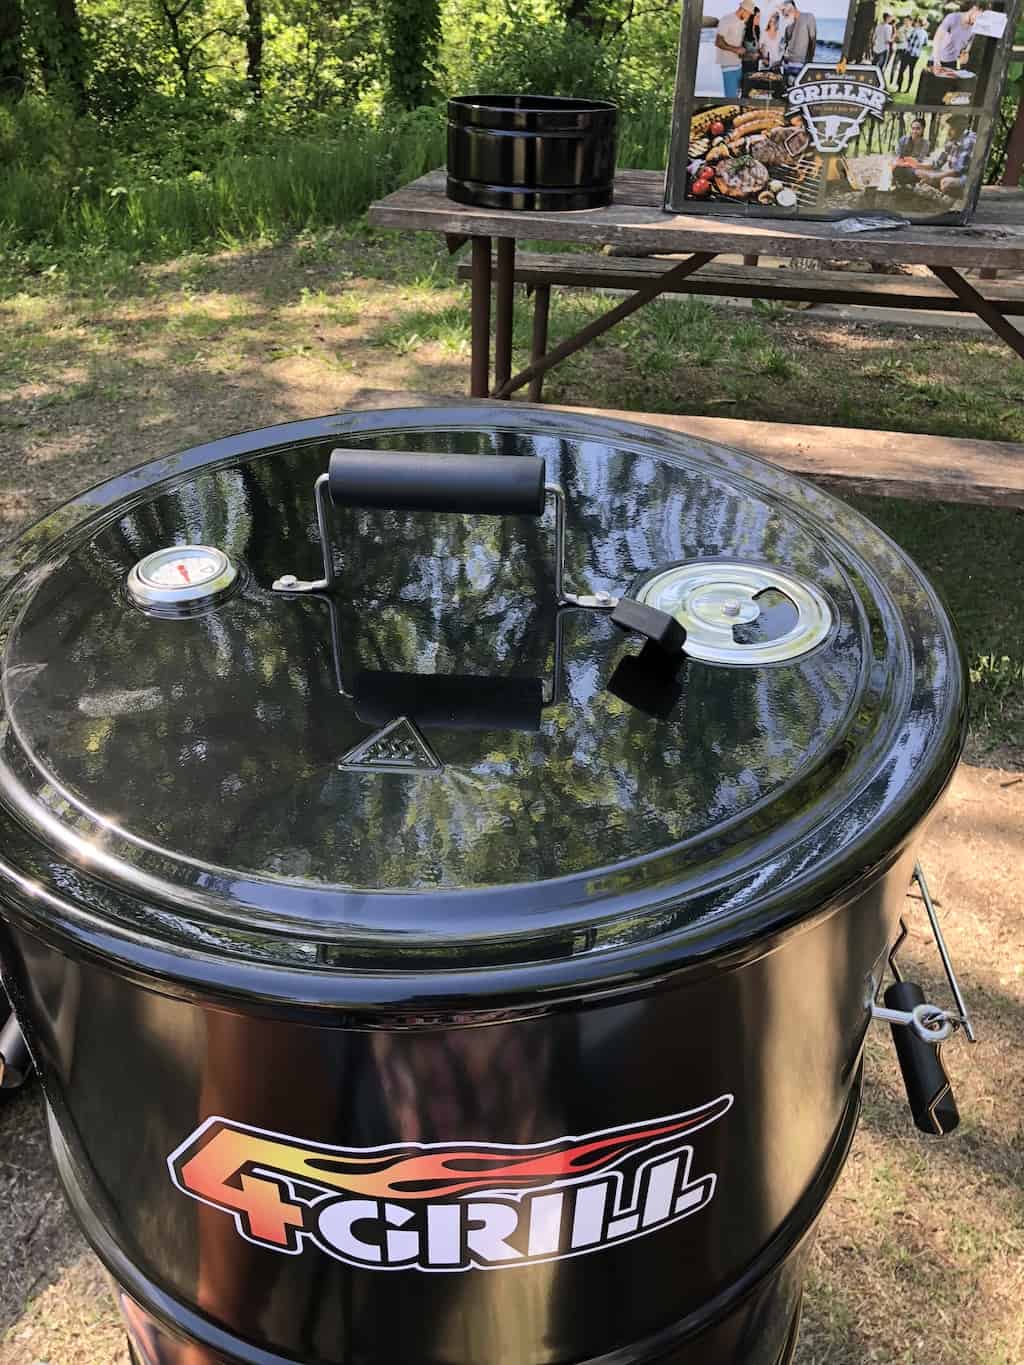 Looking like an old oil drum, the 4Grill can grill, smoke, slow cook, and be your fire pit and is compact enough to take in your car.